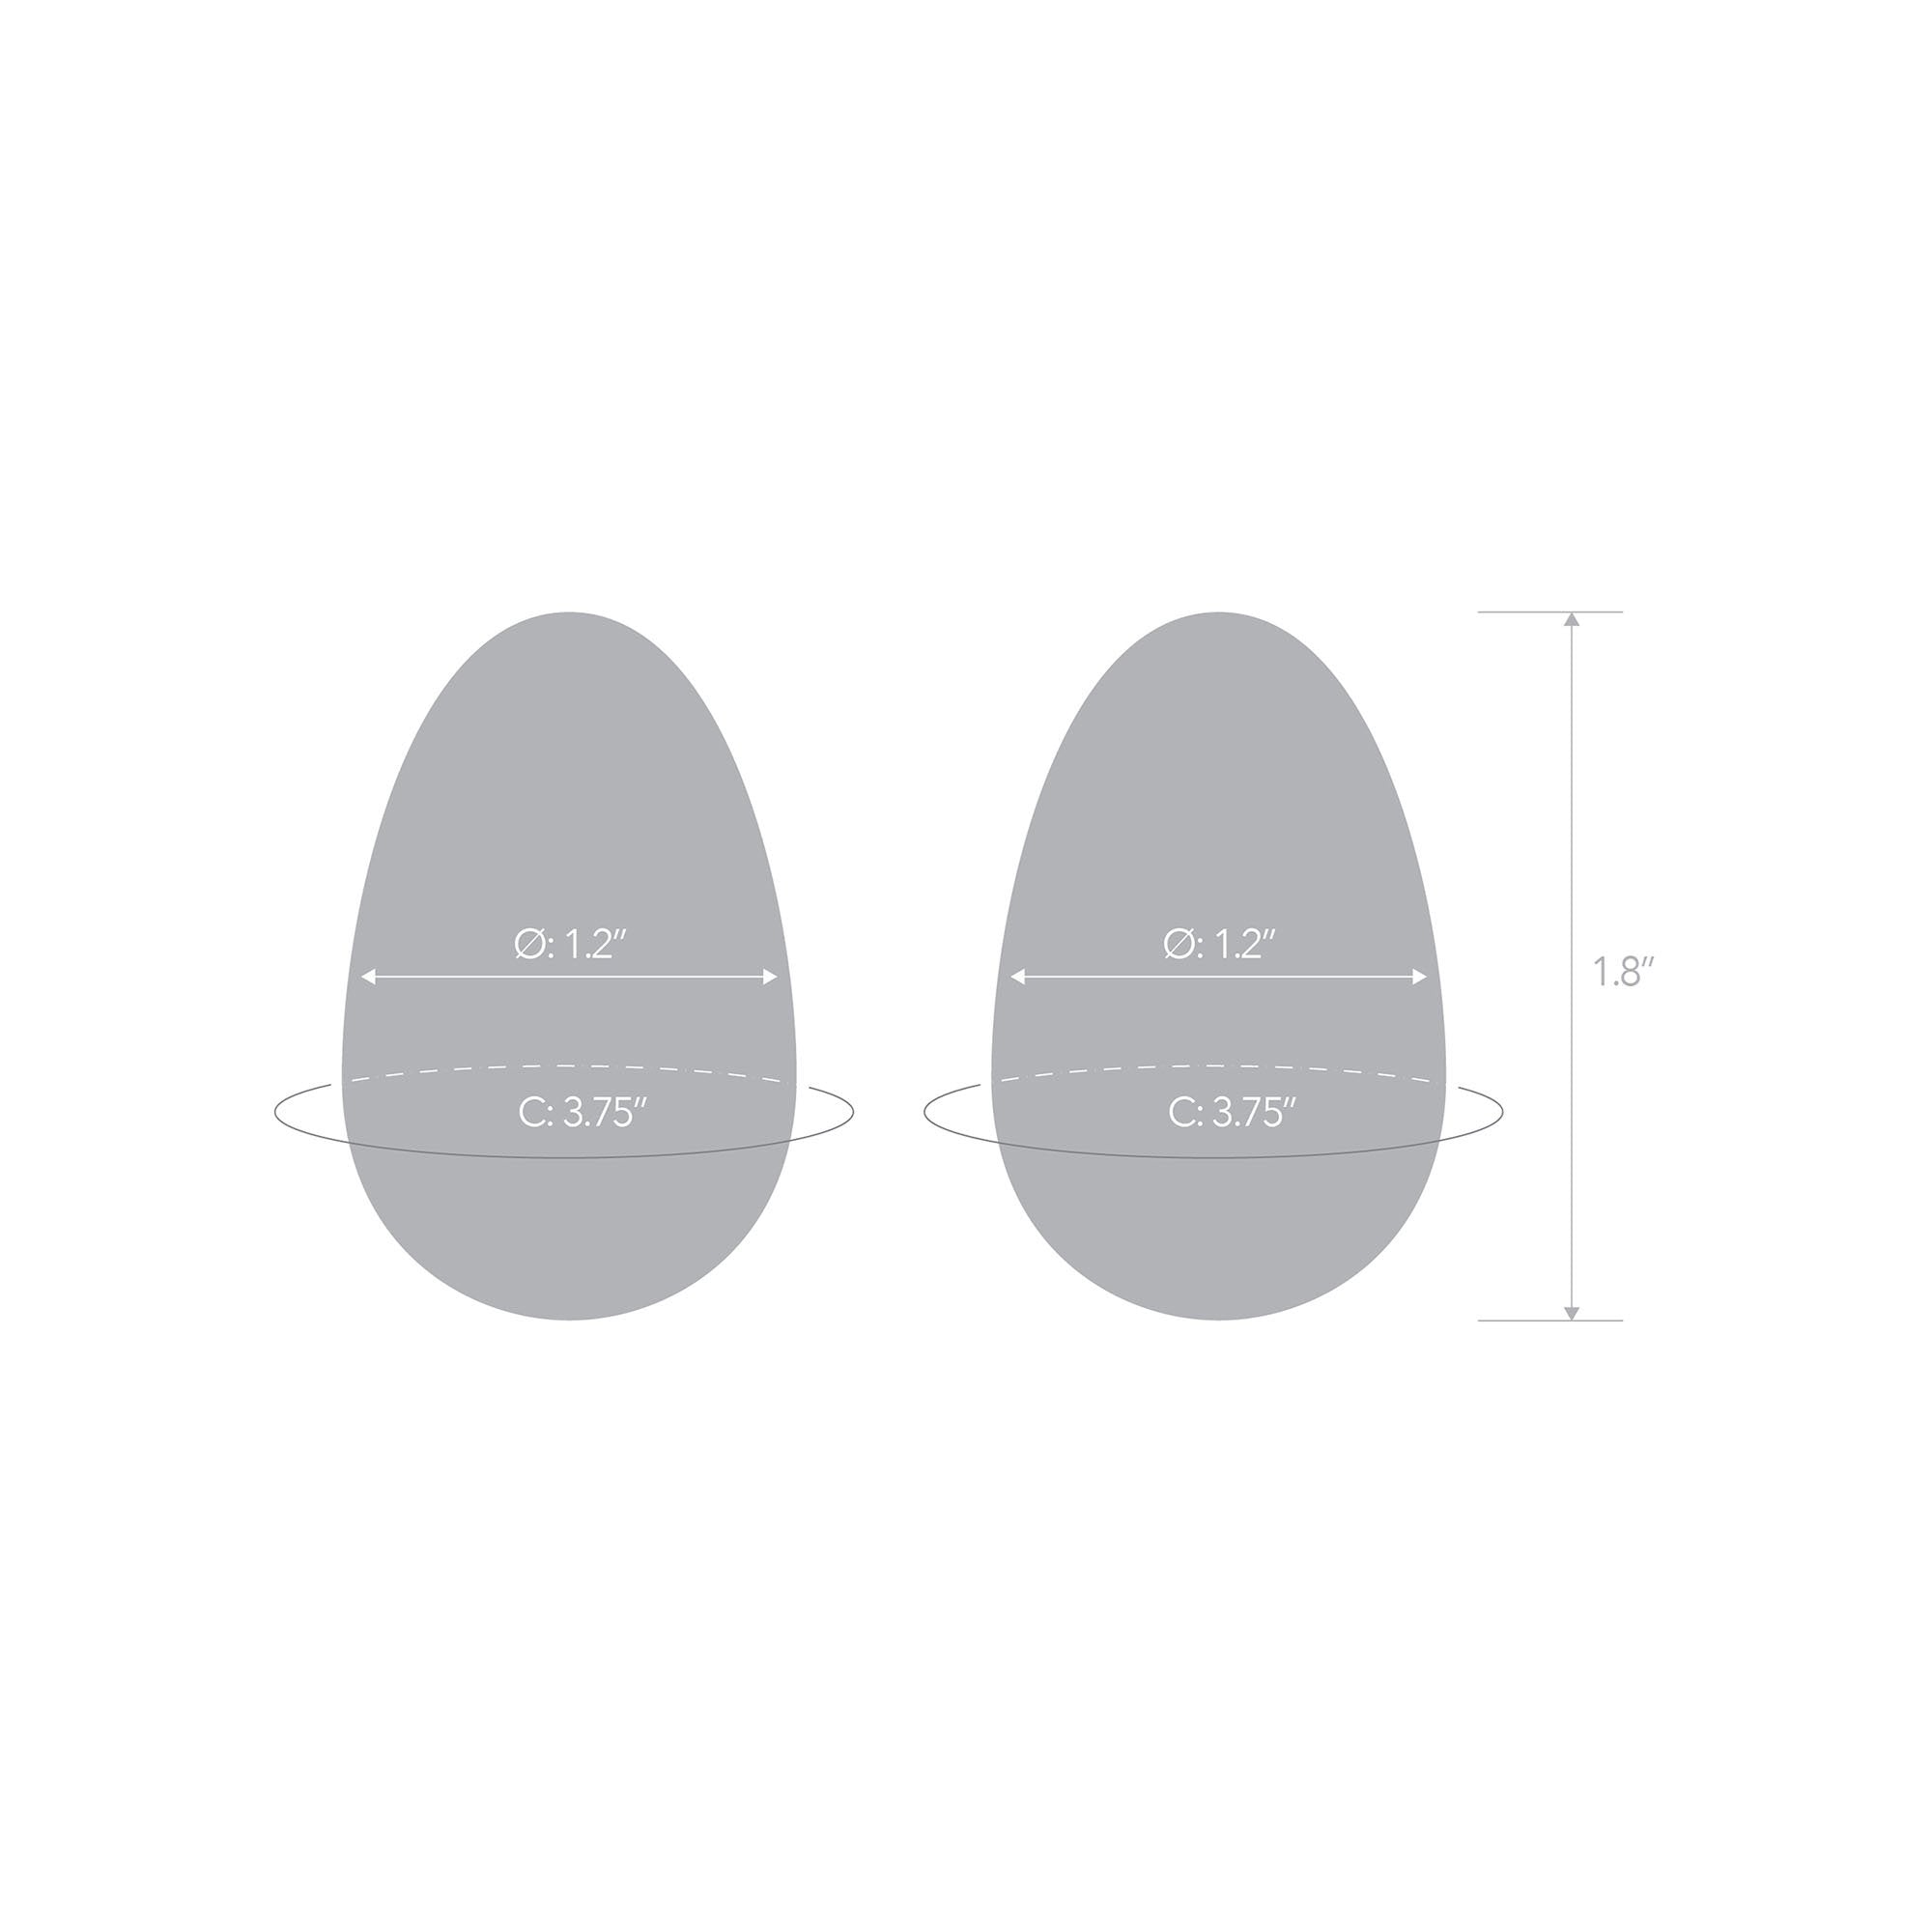 Specifications of the Glass Yoni Eggs Set (2 Pieces)